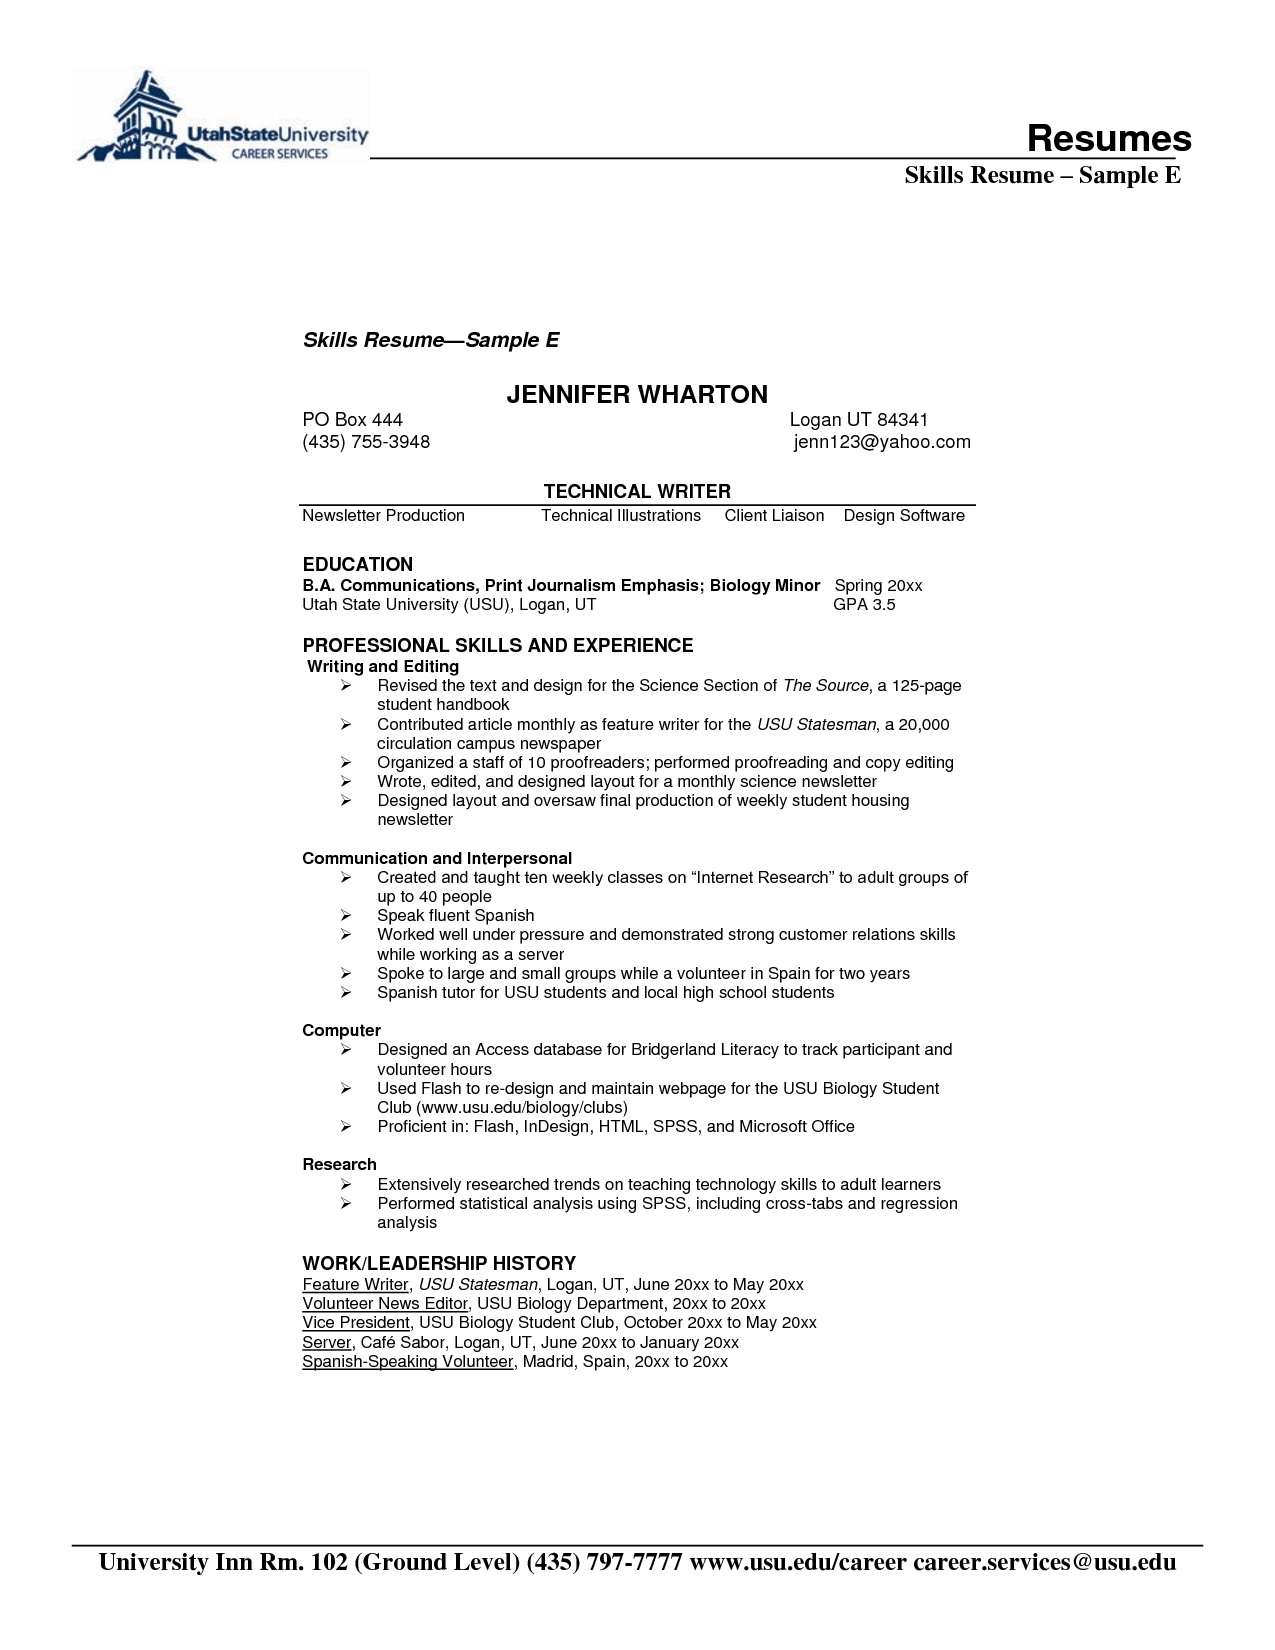 Resume Format With Skills 